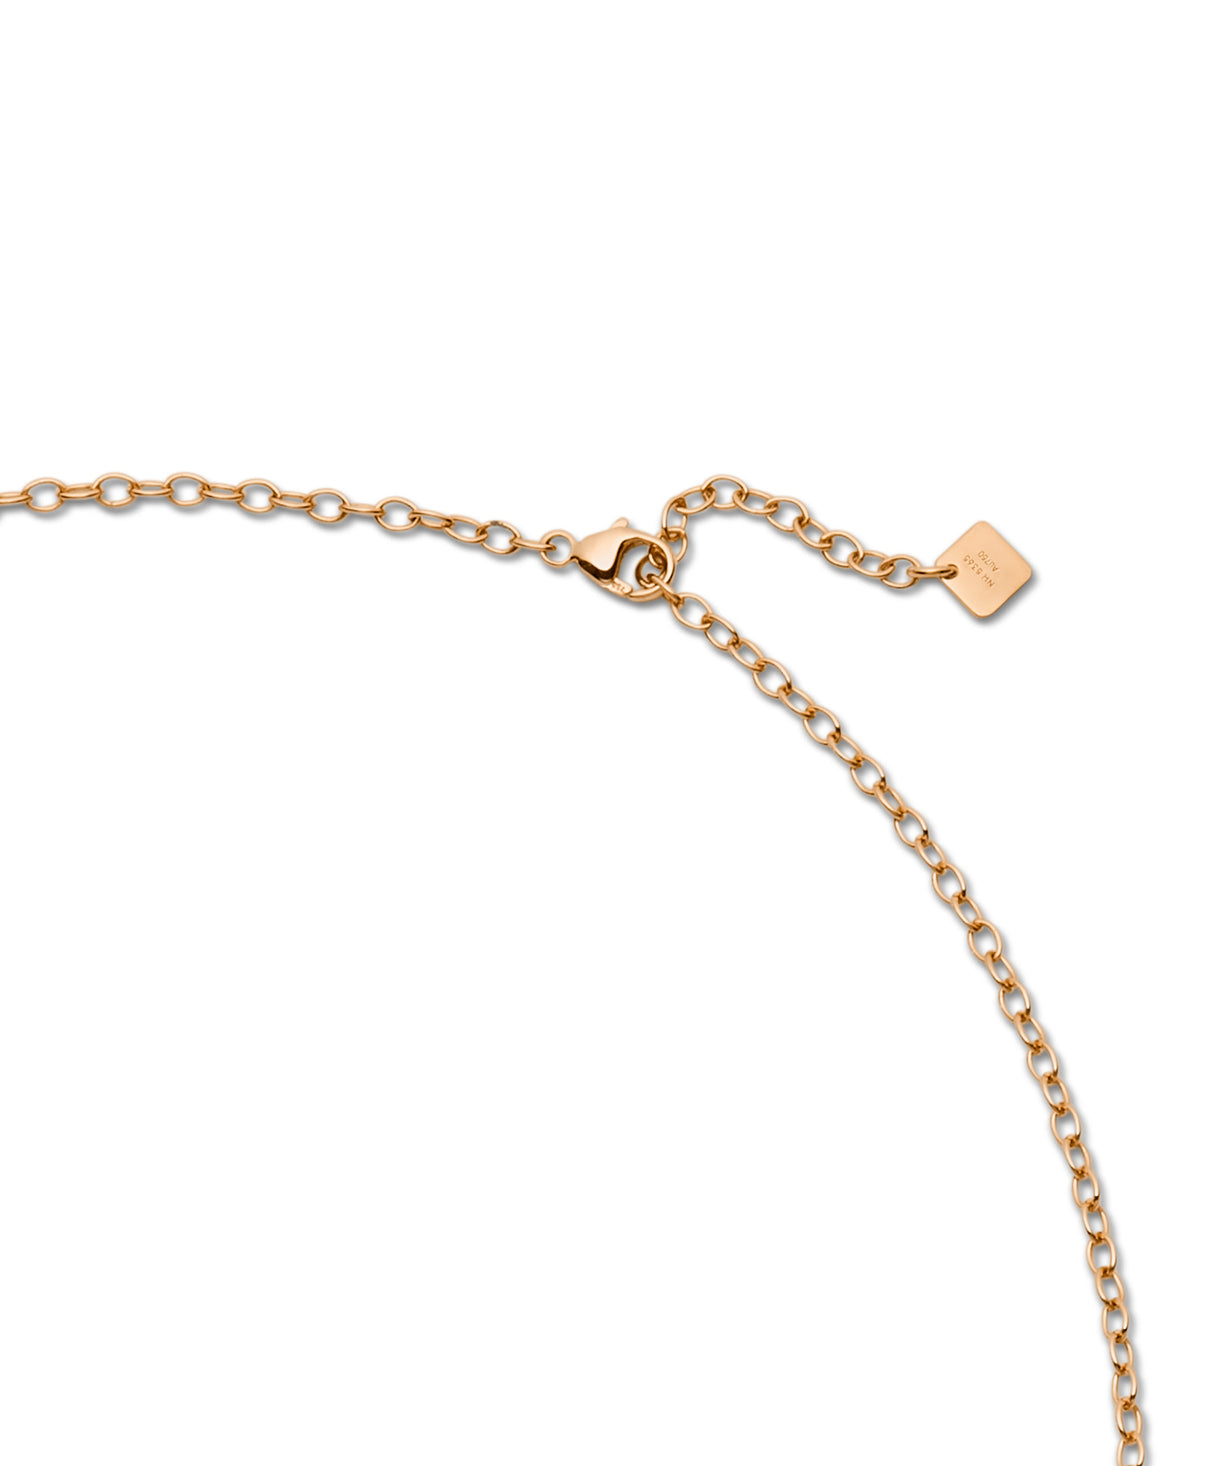 Paris PM Medallion: Discover Luxury Fine Jewelry | Nouvel Heritage || Rose Gold